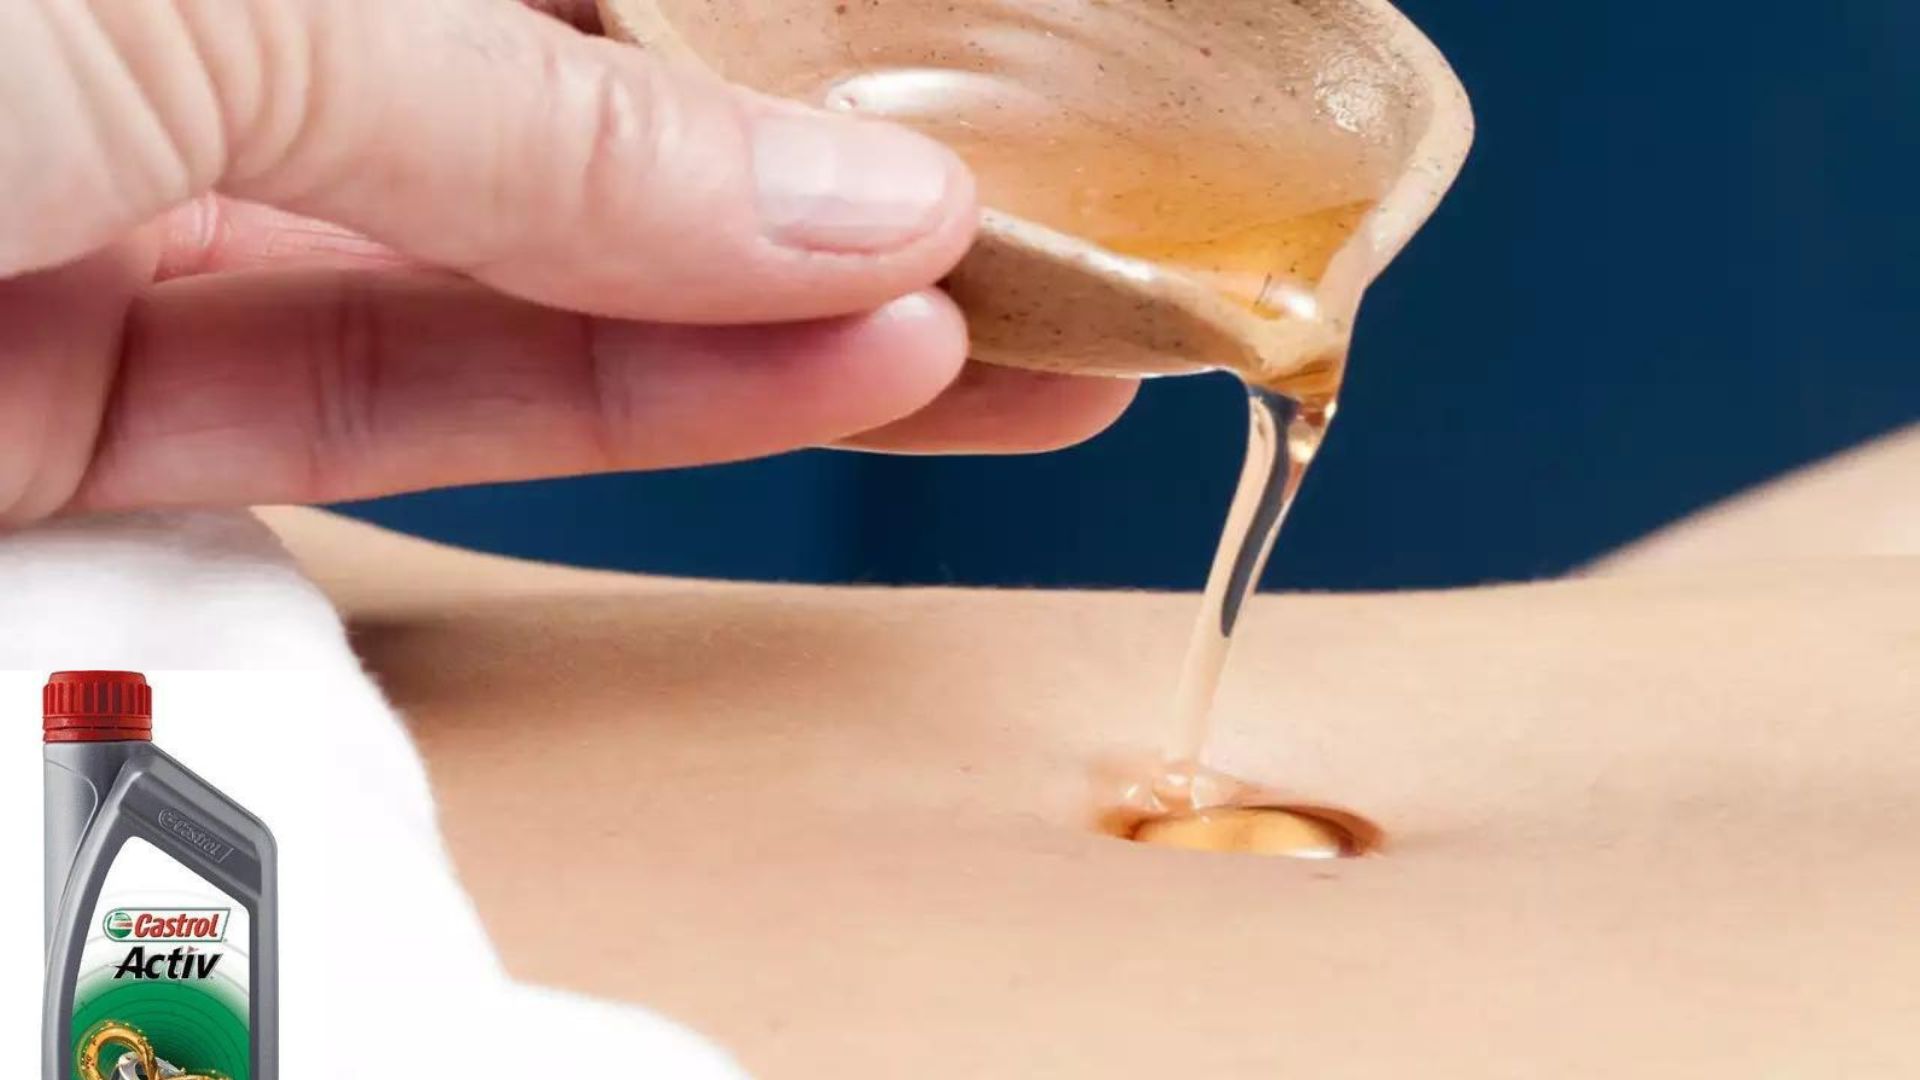 Danger of putting Castrol oil in belly button